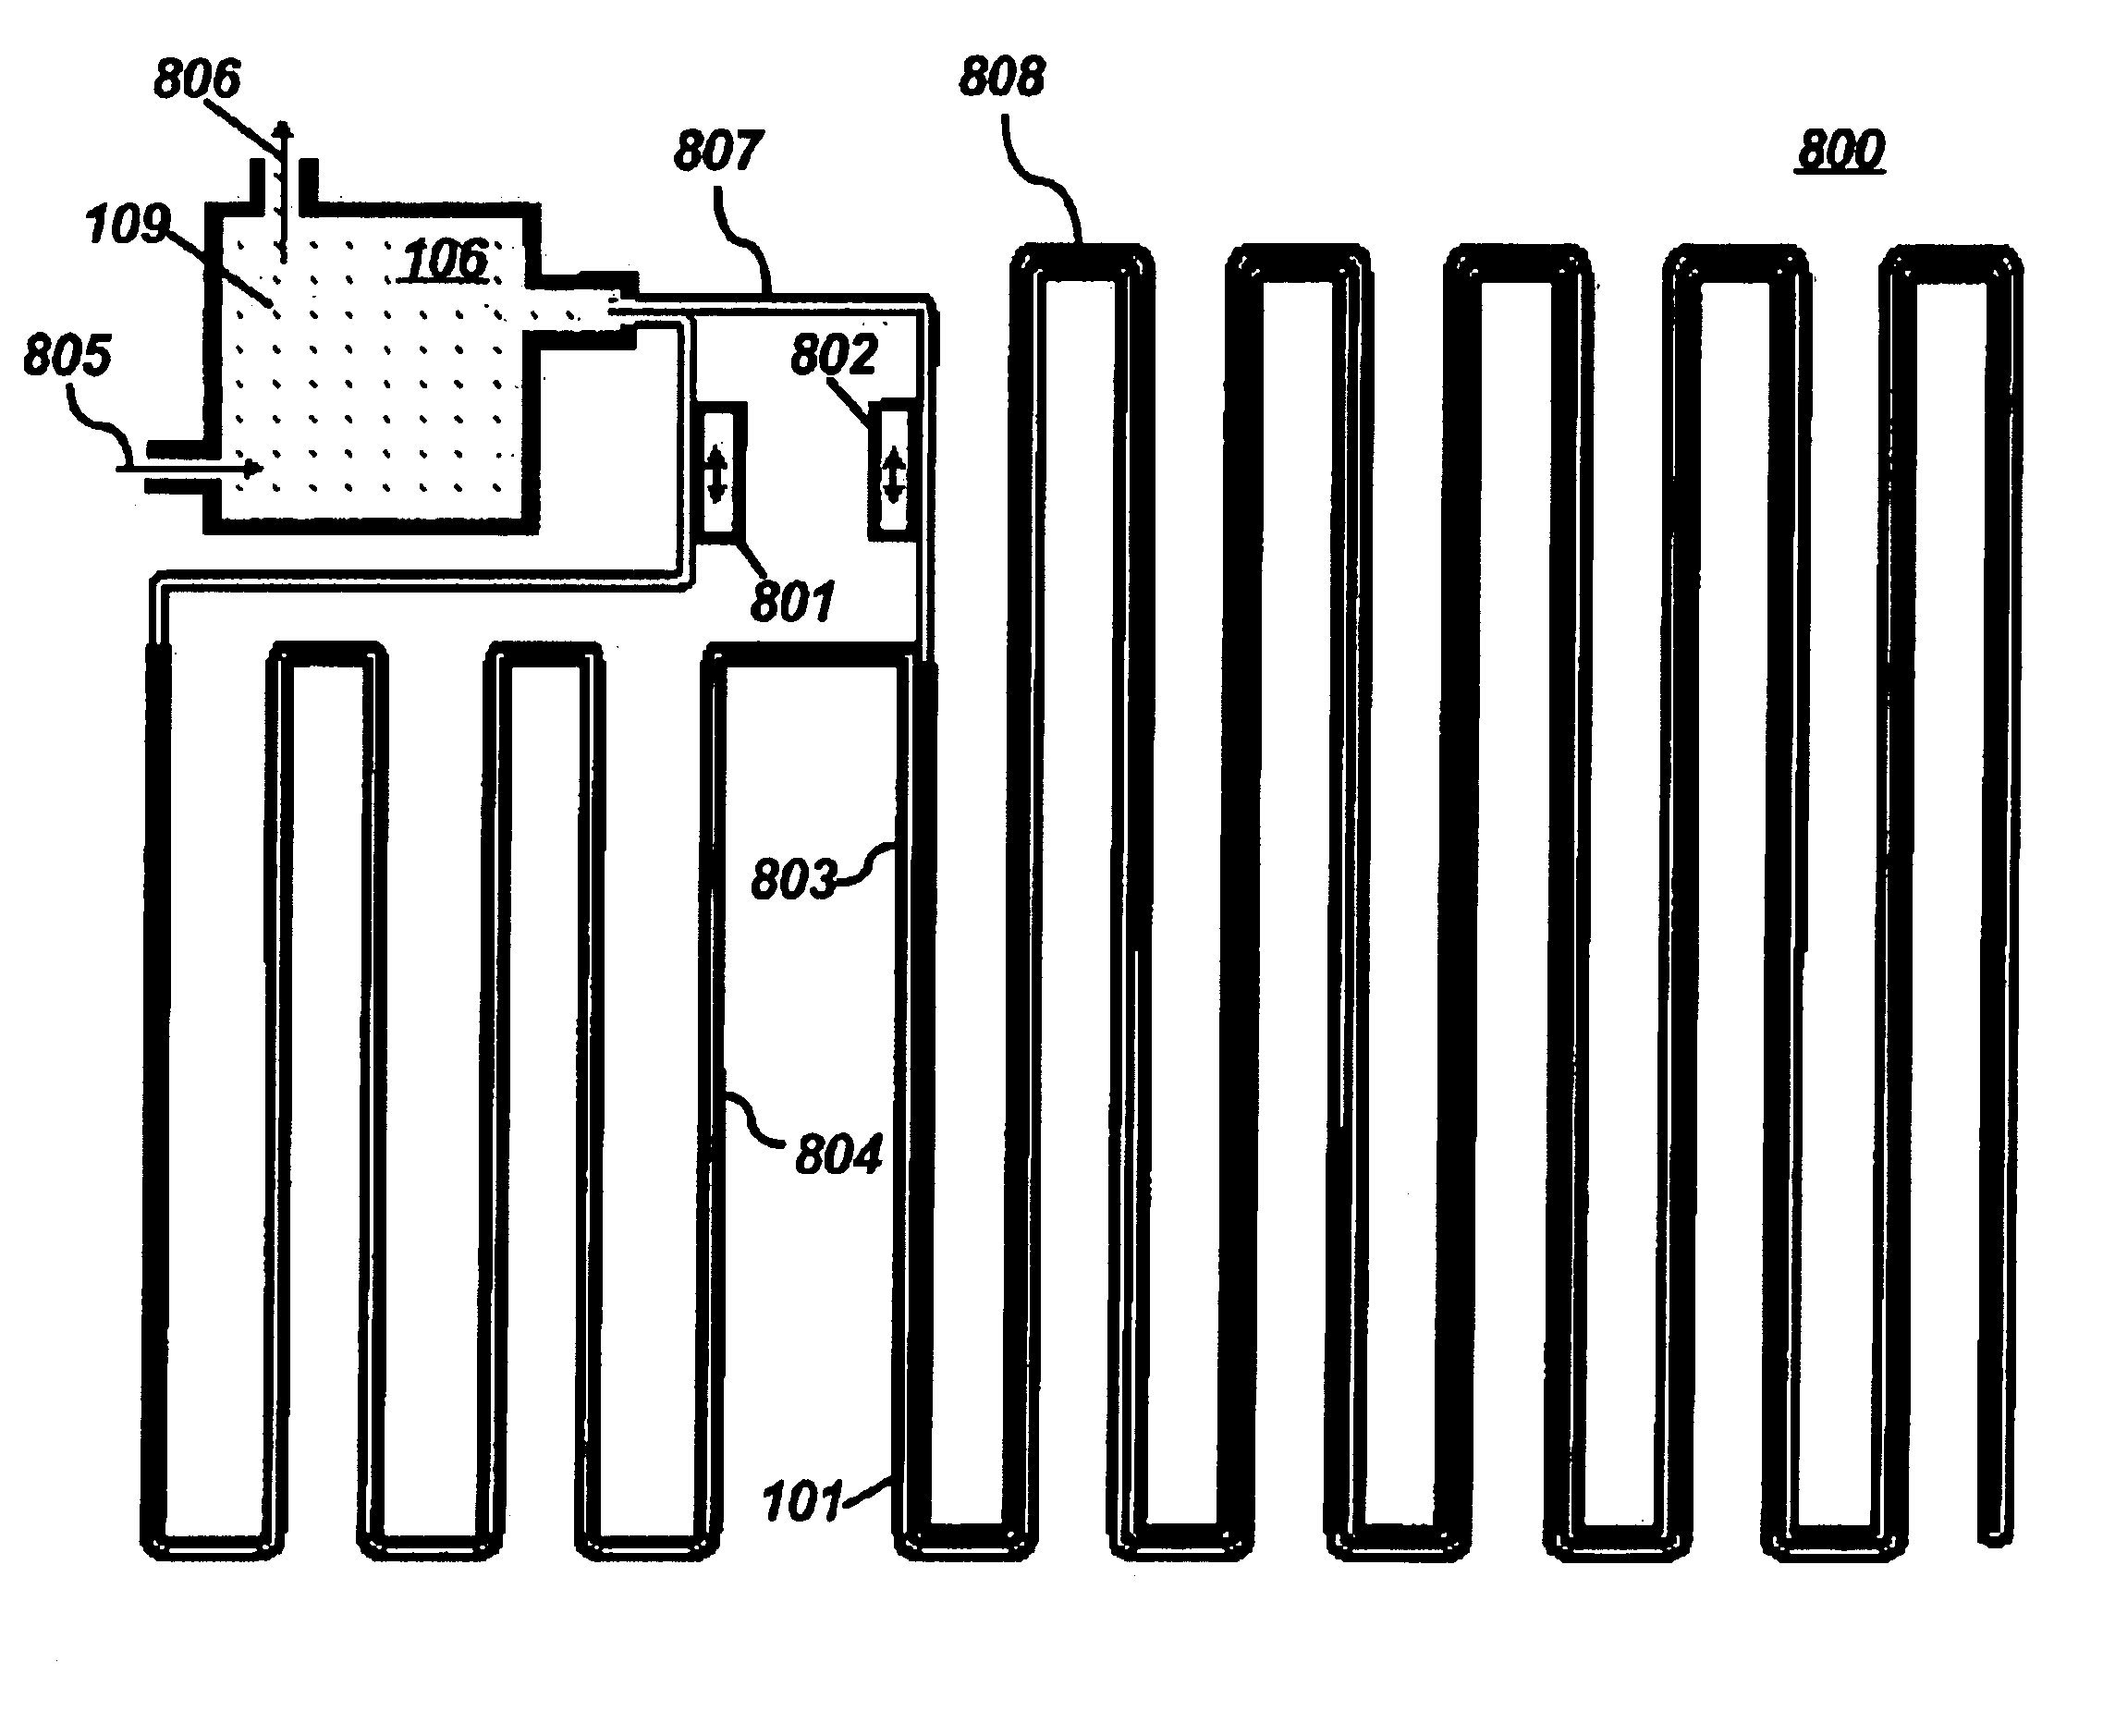 Irrigation and drainage based on hydrodynamic unsaturated fluid flow